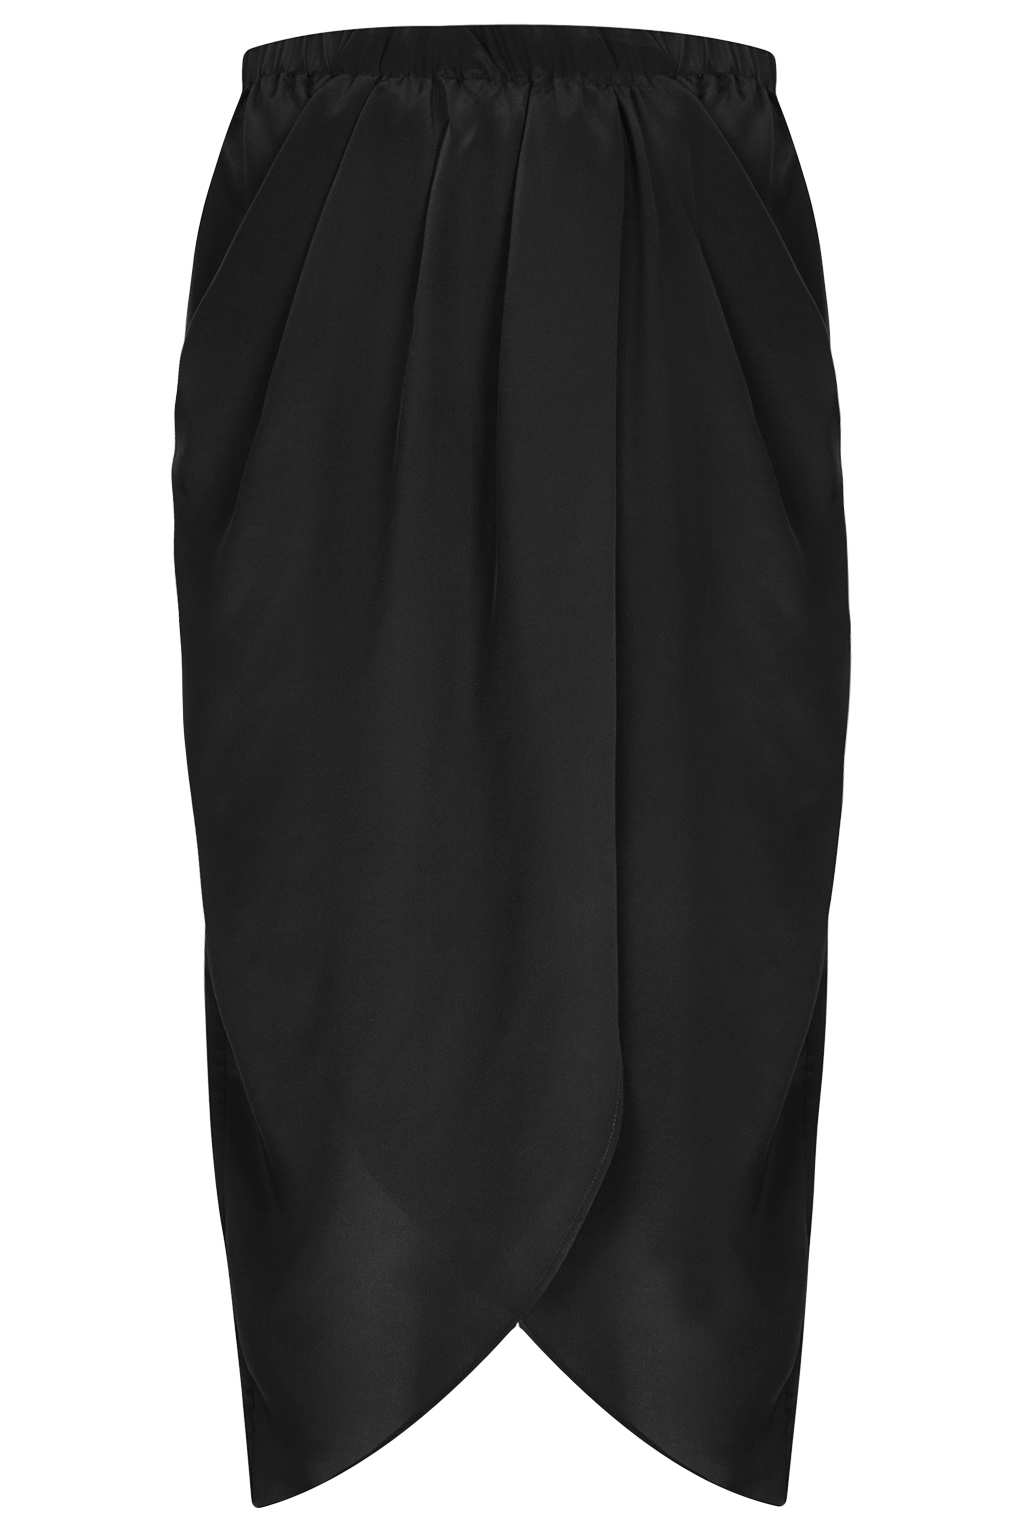 Topshop Silk Wrap Skirt By Boutique in Black | Lyst